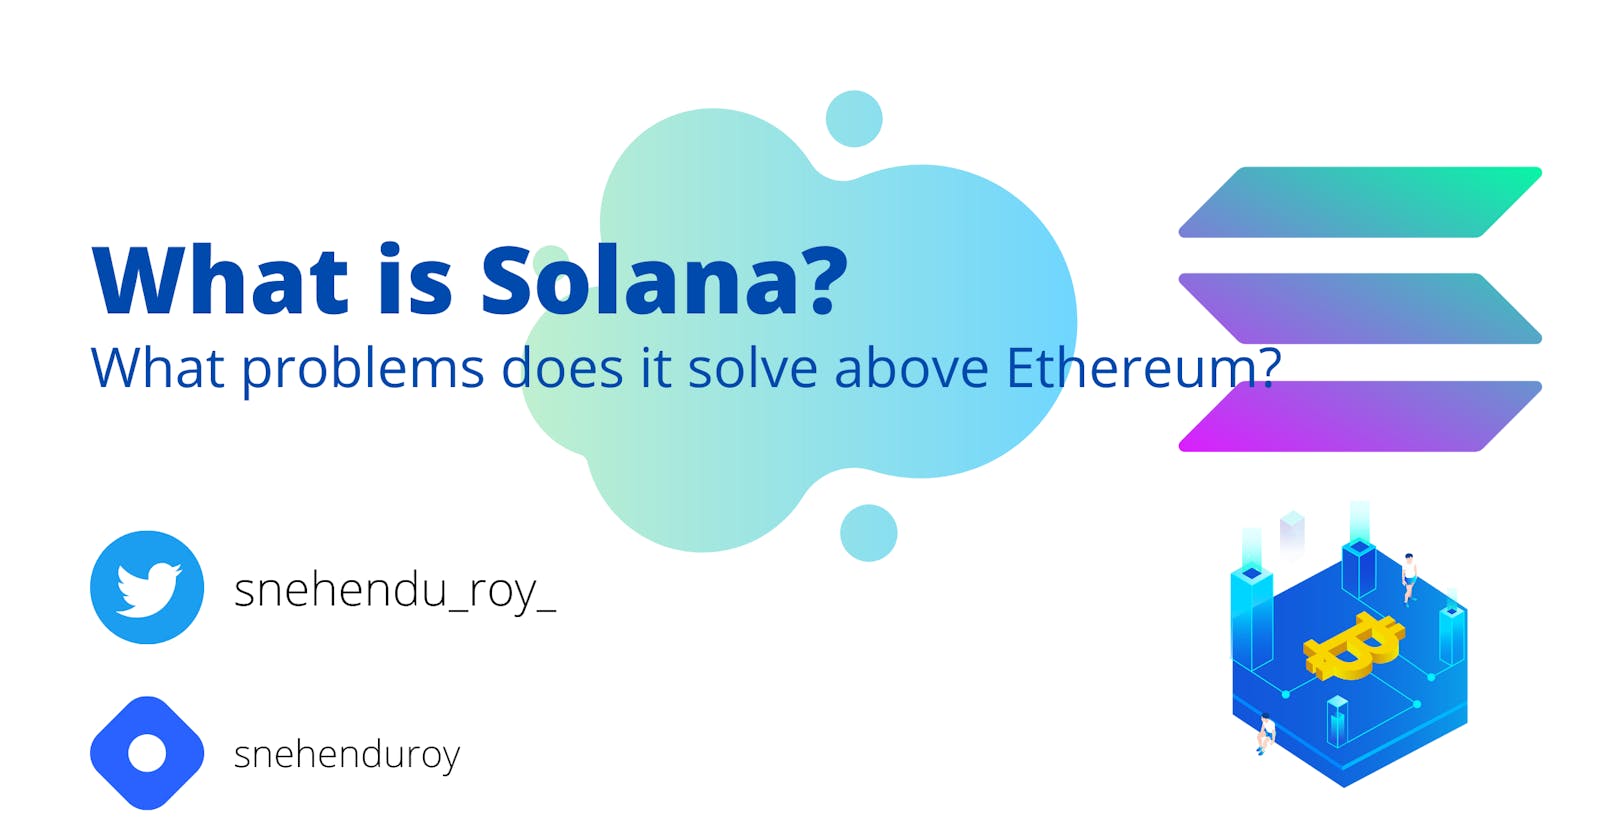 What is Solana and what problem does it solve above ethereum